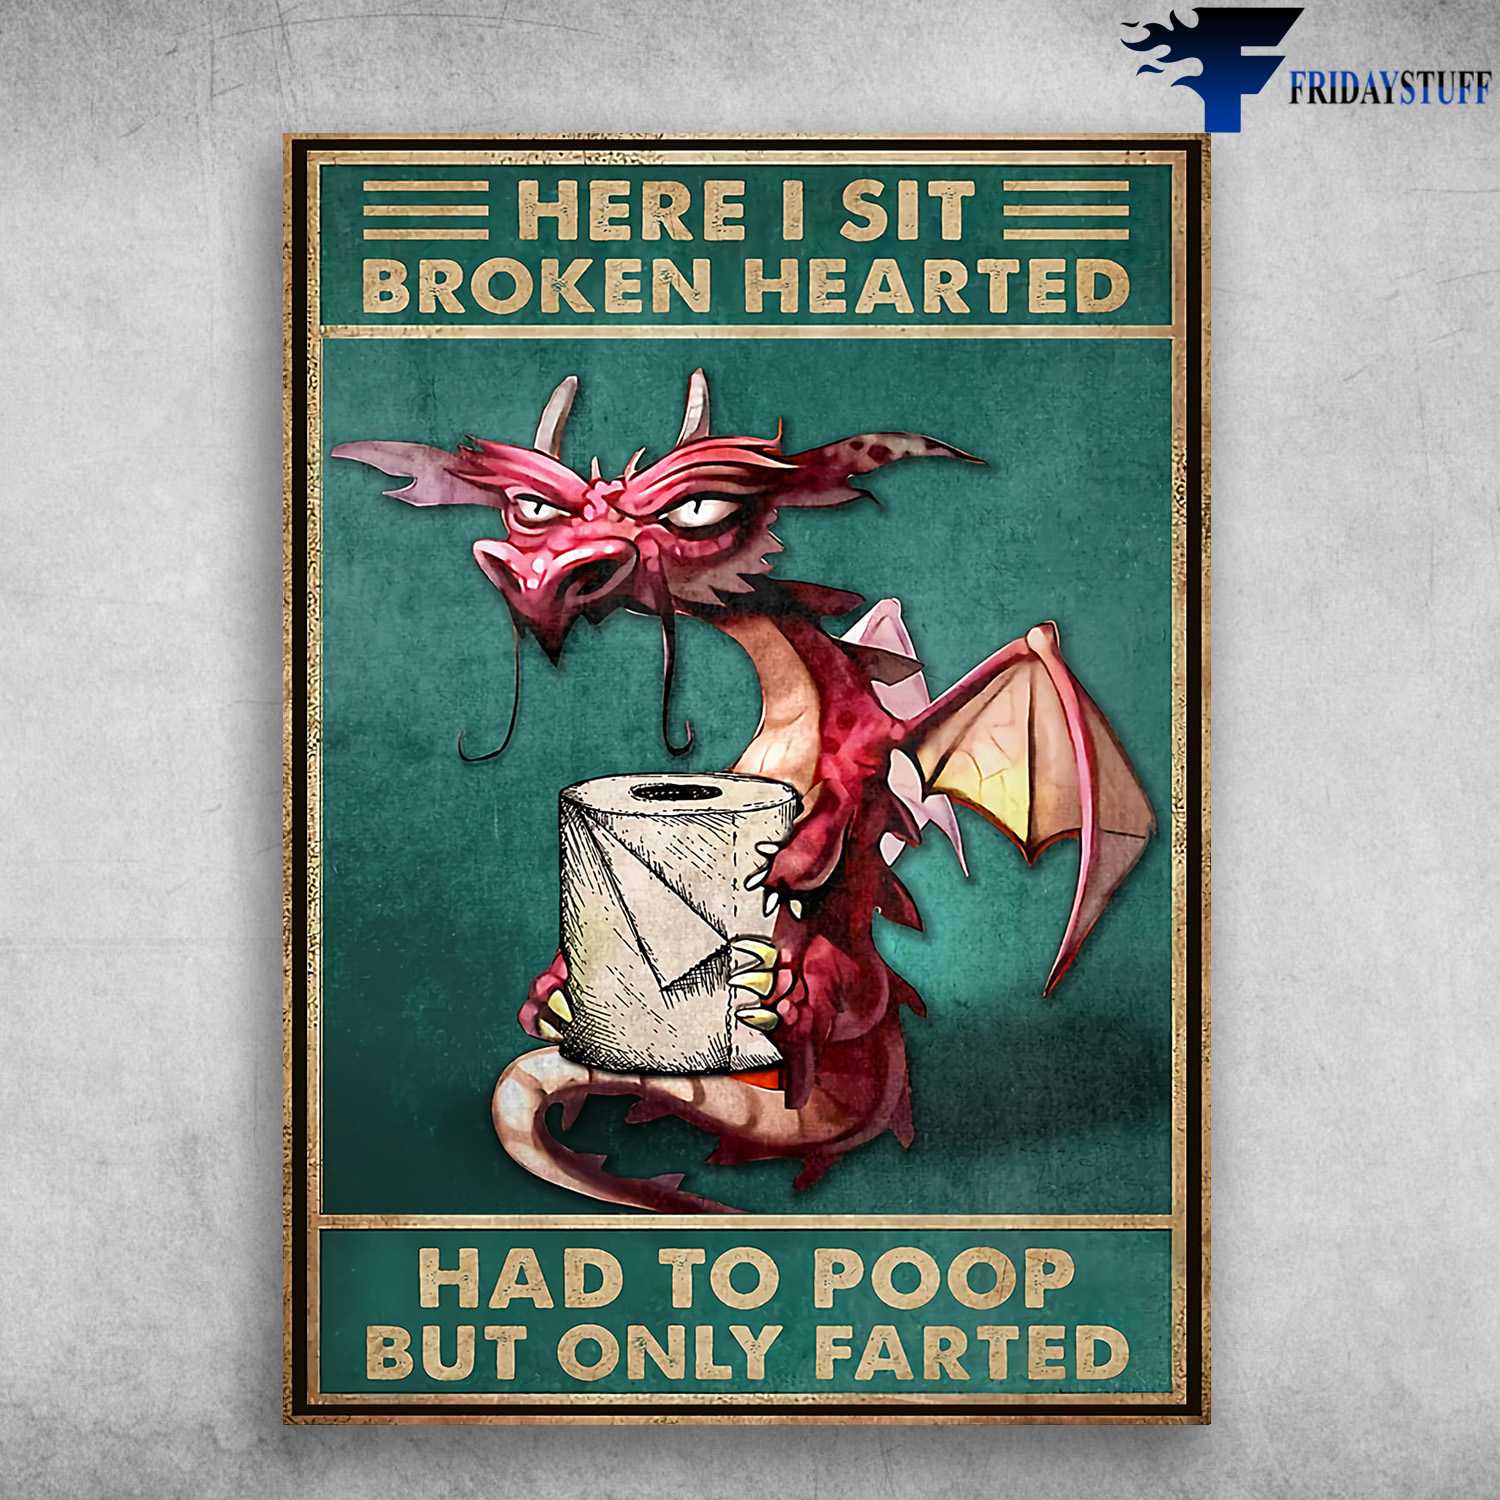 Dragon Toilet Paper Roll - Here I Sit Broken Hearted, Had To Poop But Only Farted